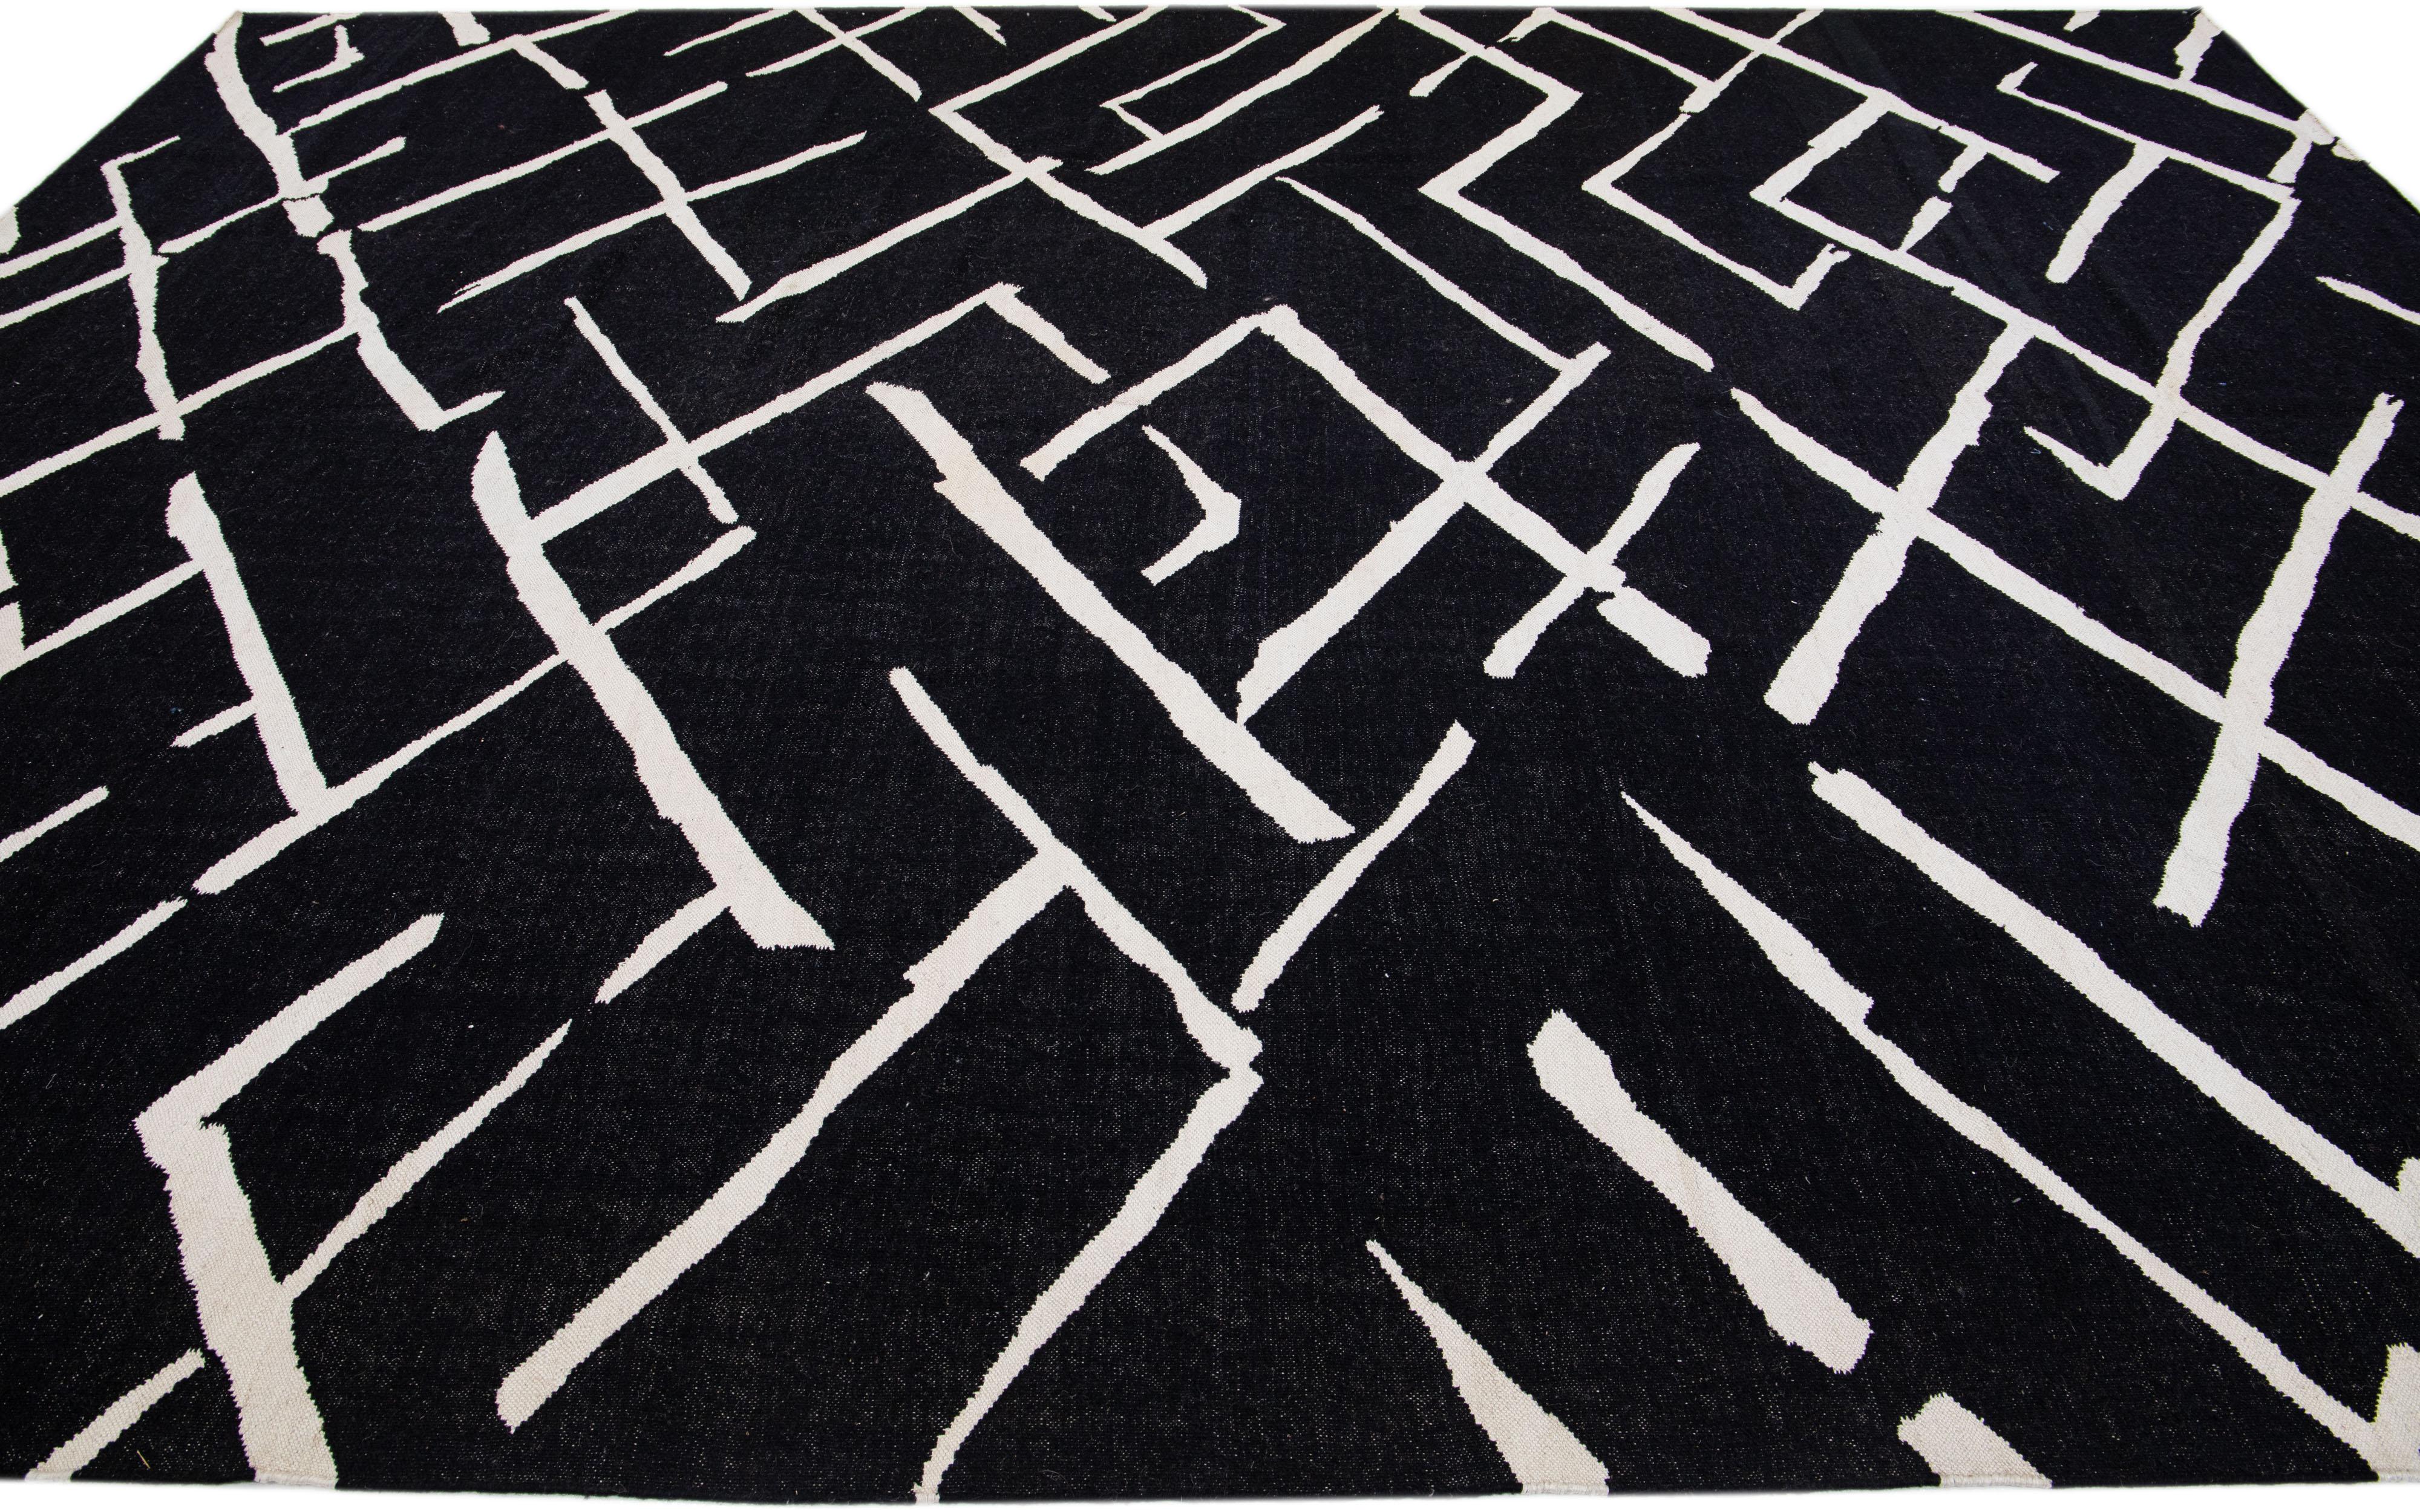 Black & White Modern Kilim Flatweave Wool Rug with Geometric Pattern In Excellent Condition For Sale In Norwalk, CT